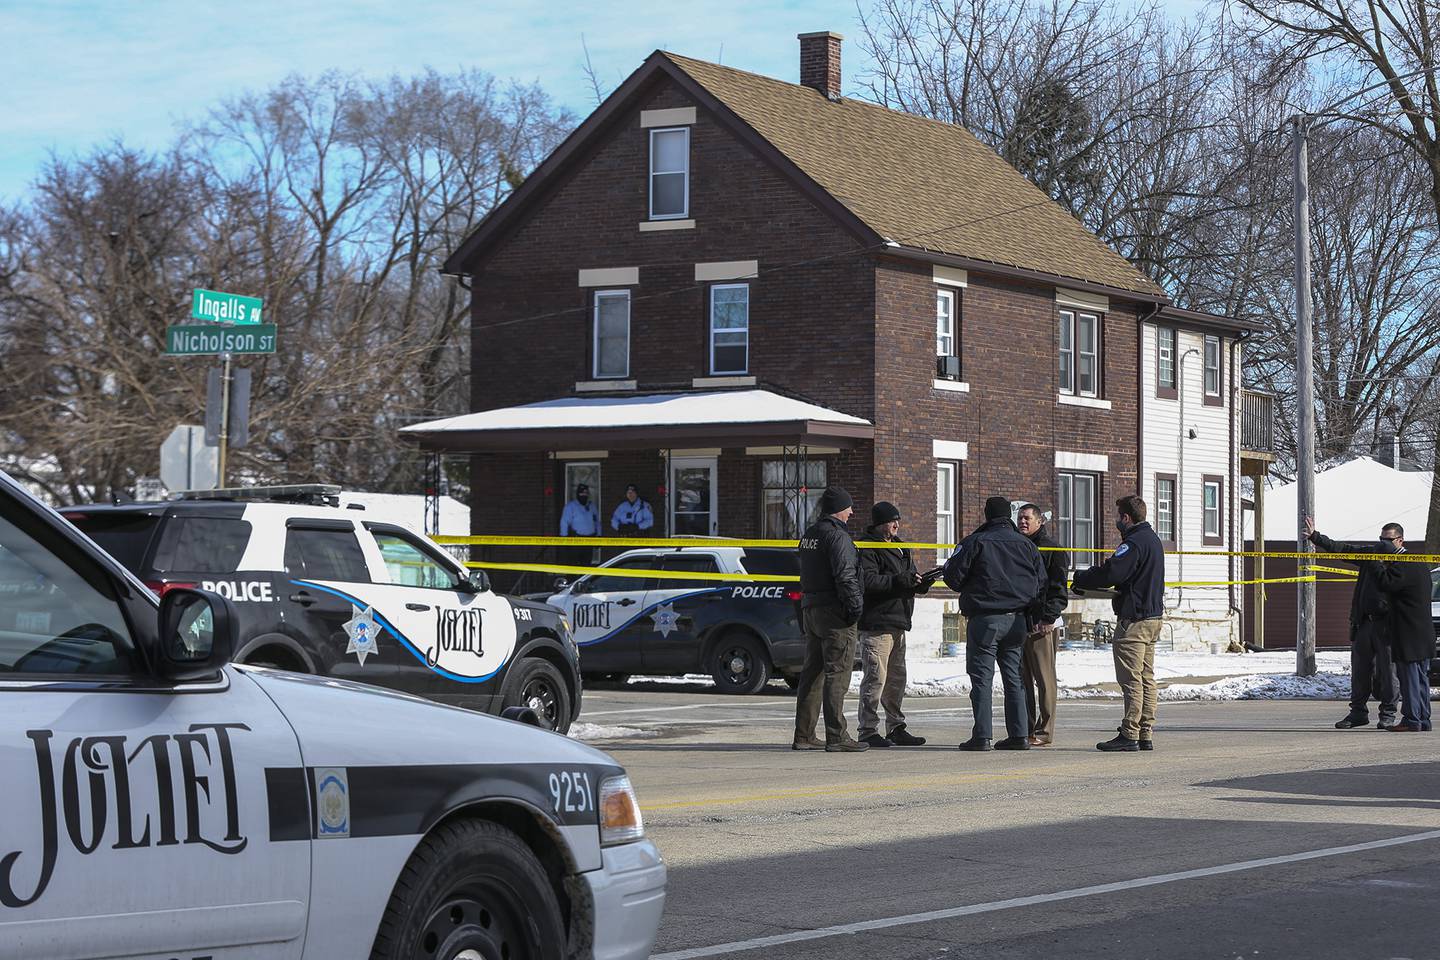 Police gather at the intersection of Ingalls Avenue and Nicholson Street after an officer implicated a shooting that took place Thursday, January 28, 2021 in Joliet, Illinois.